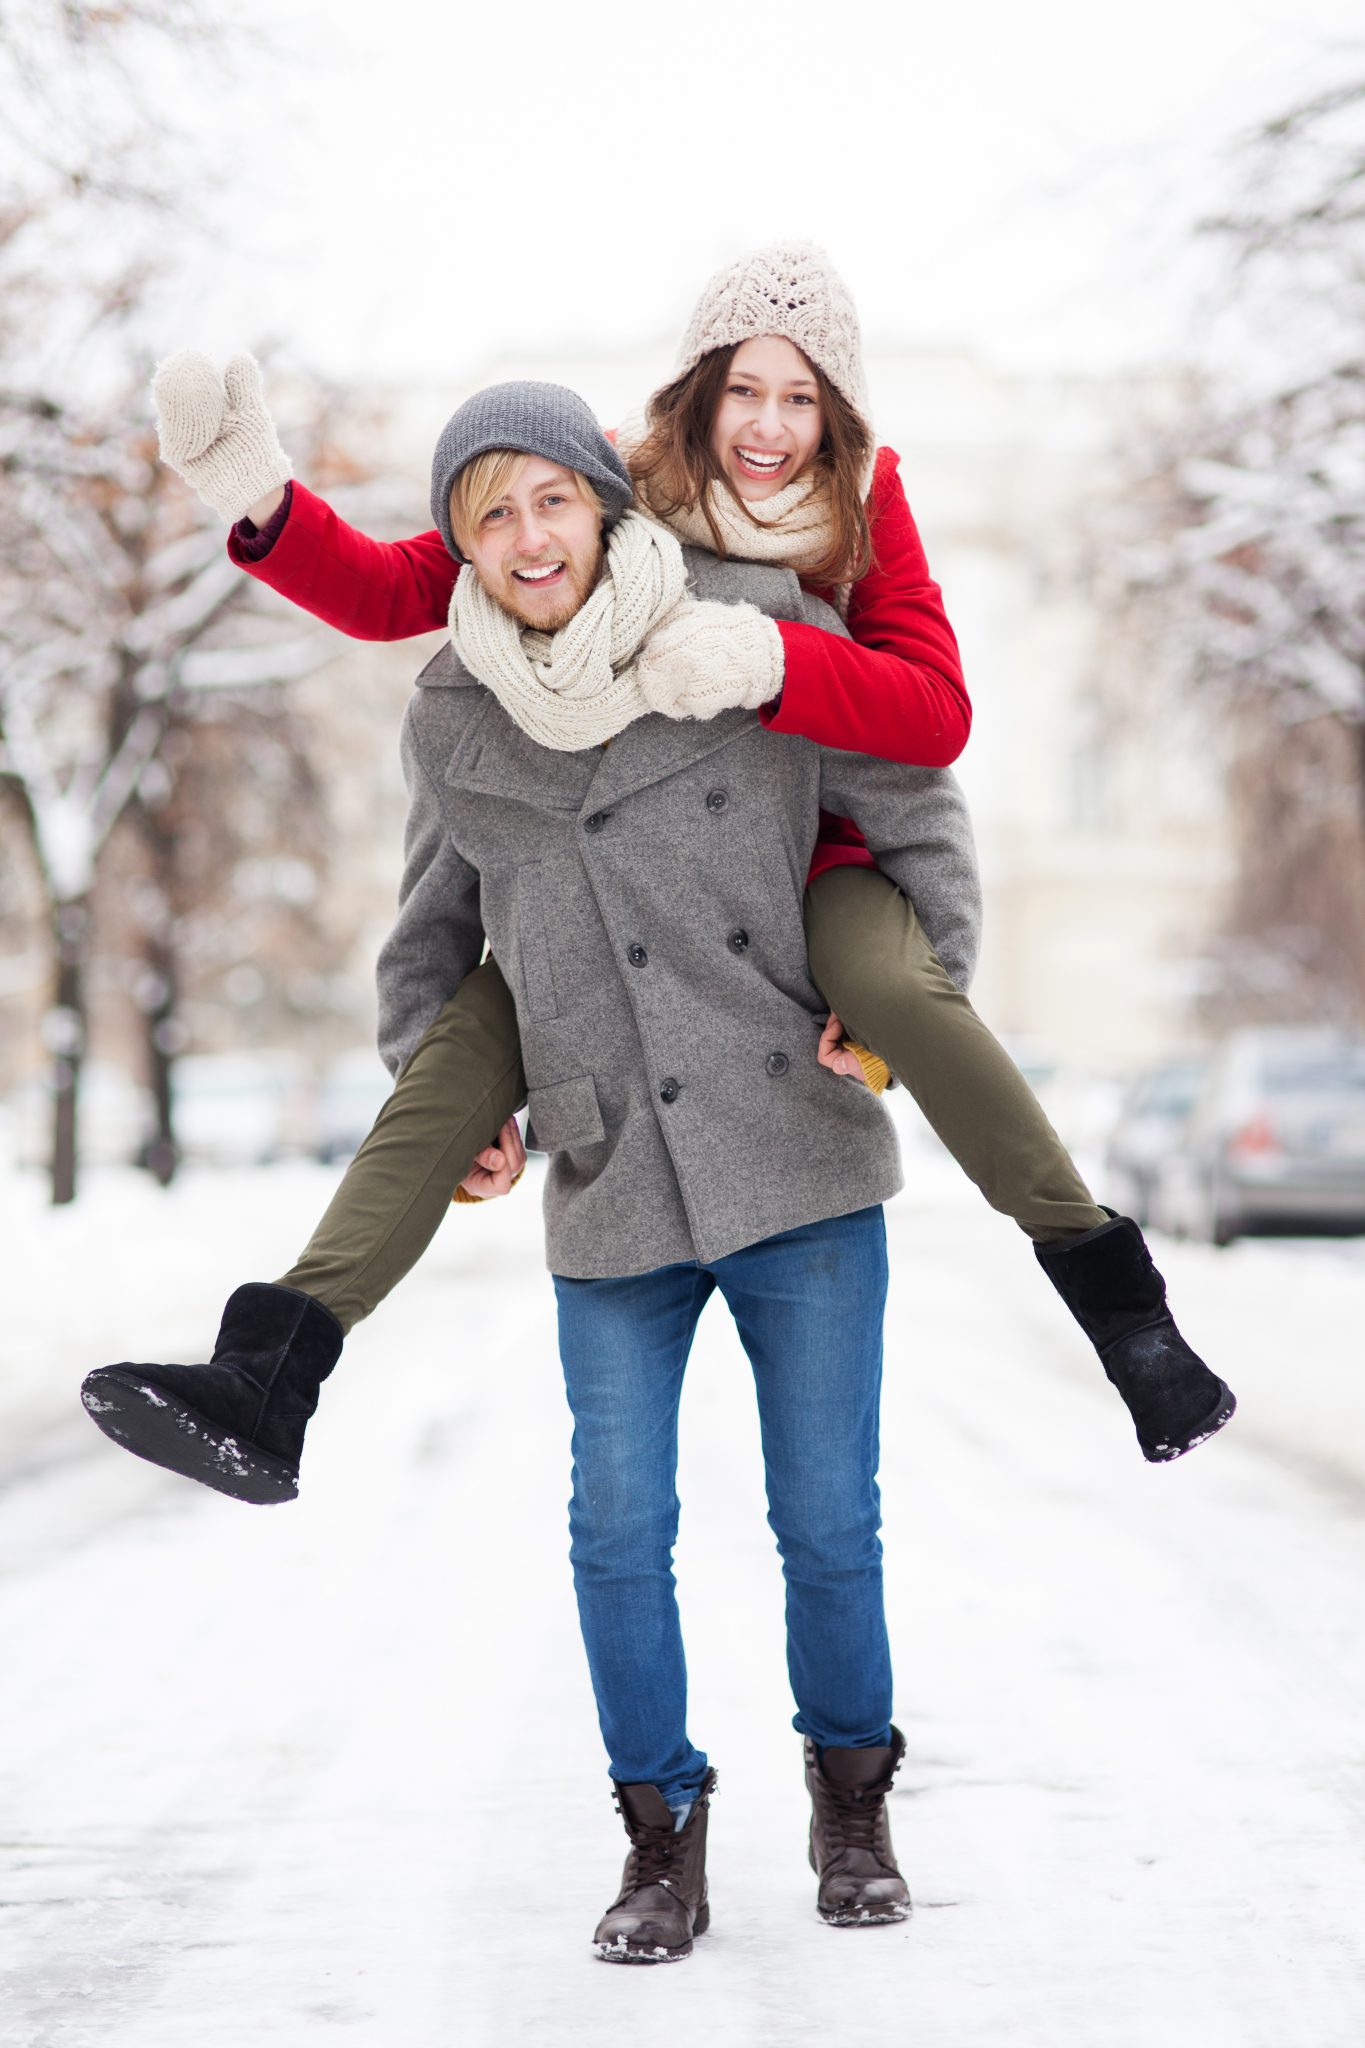 DLI’s Consumer News You Can Use for COLD WEATHER!